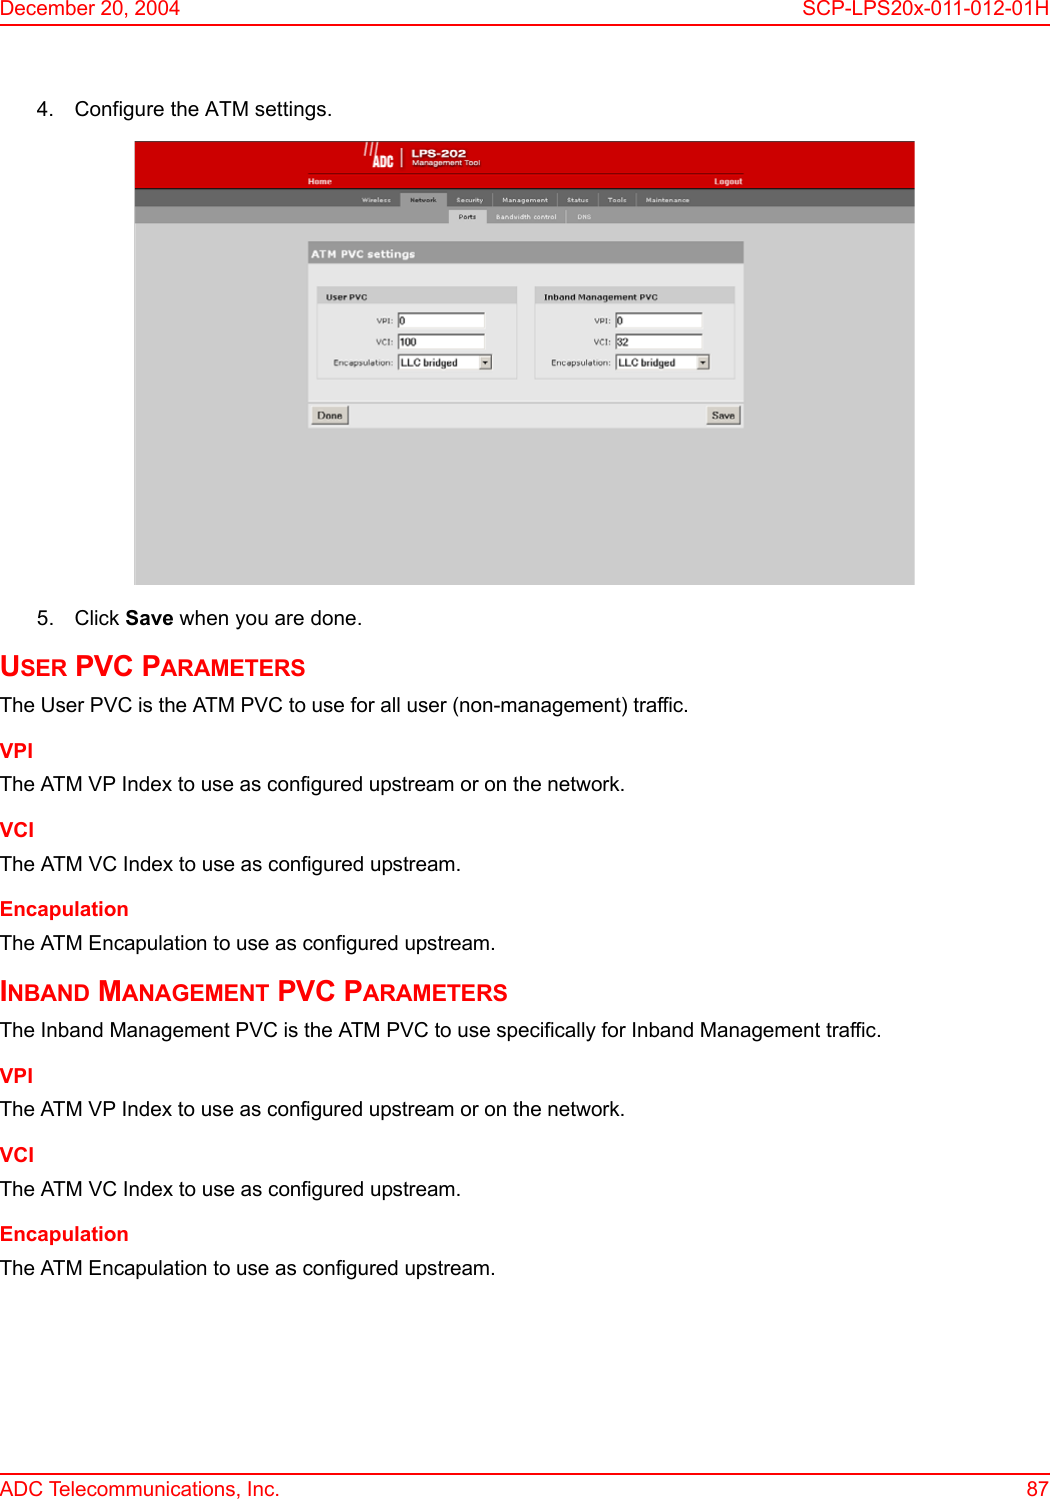 December 20, 2004 SCP-LPS20x-011-012-01HADC Telecommunications, Inc. 874. Configure the ATM settings.5. Click Save when you are done.USER PVC PARAMETERSThe User PVC is the ATM PVC to use for all user (non-management) traffic.VPIThe ATM VP Index to use as configured upstream or on the network.VCIThe ATM VC Index to use as configured upstream.EncapulationThe ATM Encapulation to use as configured upstream.INBAND MANAGEMENT PVC PARAMETERSThe Inband Management PVC is the ATM PVC to use specifically for Inband Management traffic.VPIThe ATM VP Index to use as configured upstream or on the network.VCIThe ATM VC Index to use as configured upstream.EncapulationThe ATM Encapulation to use as configured upstream.